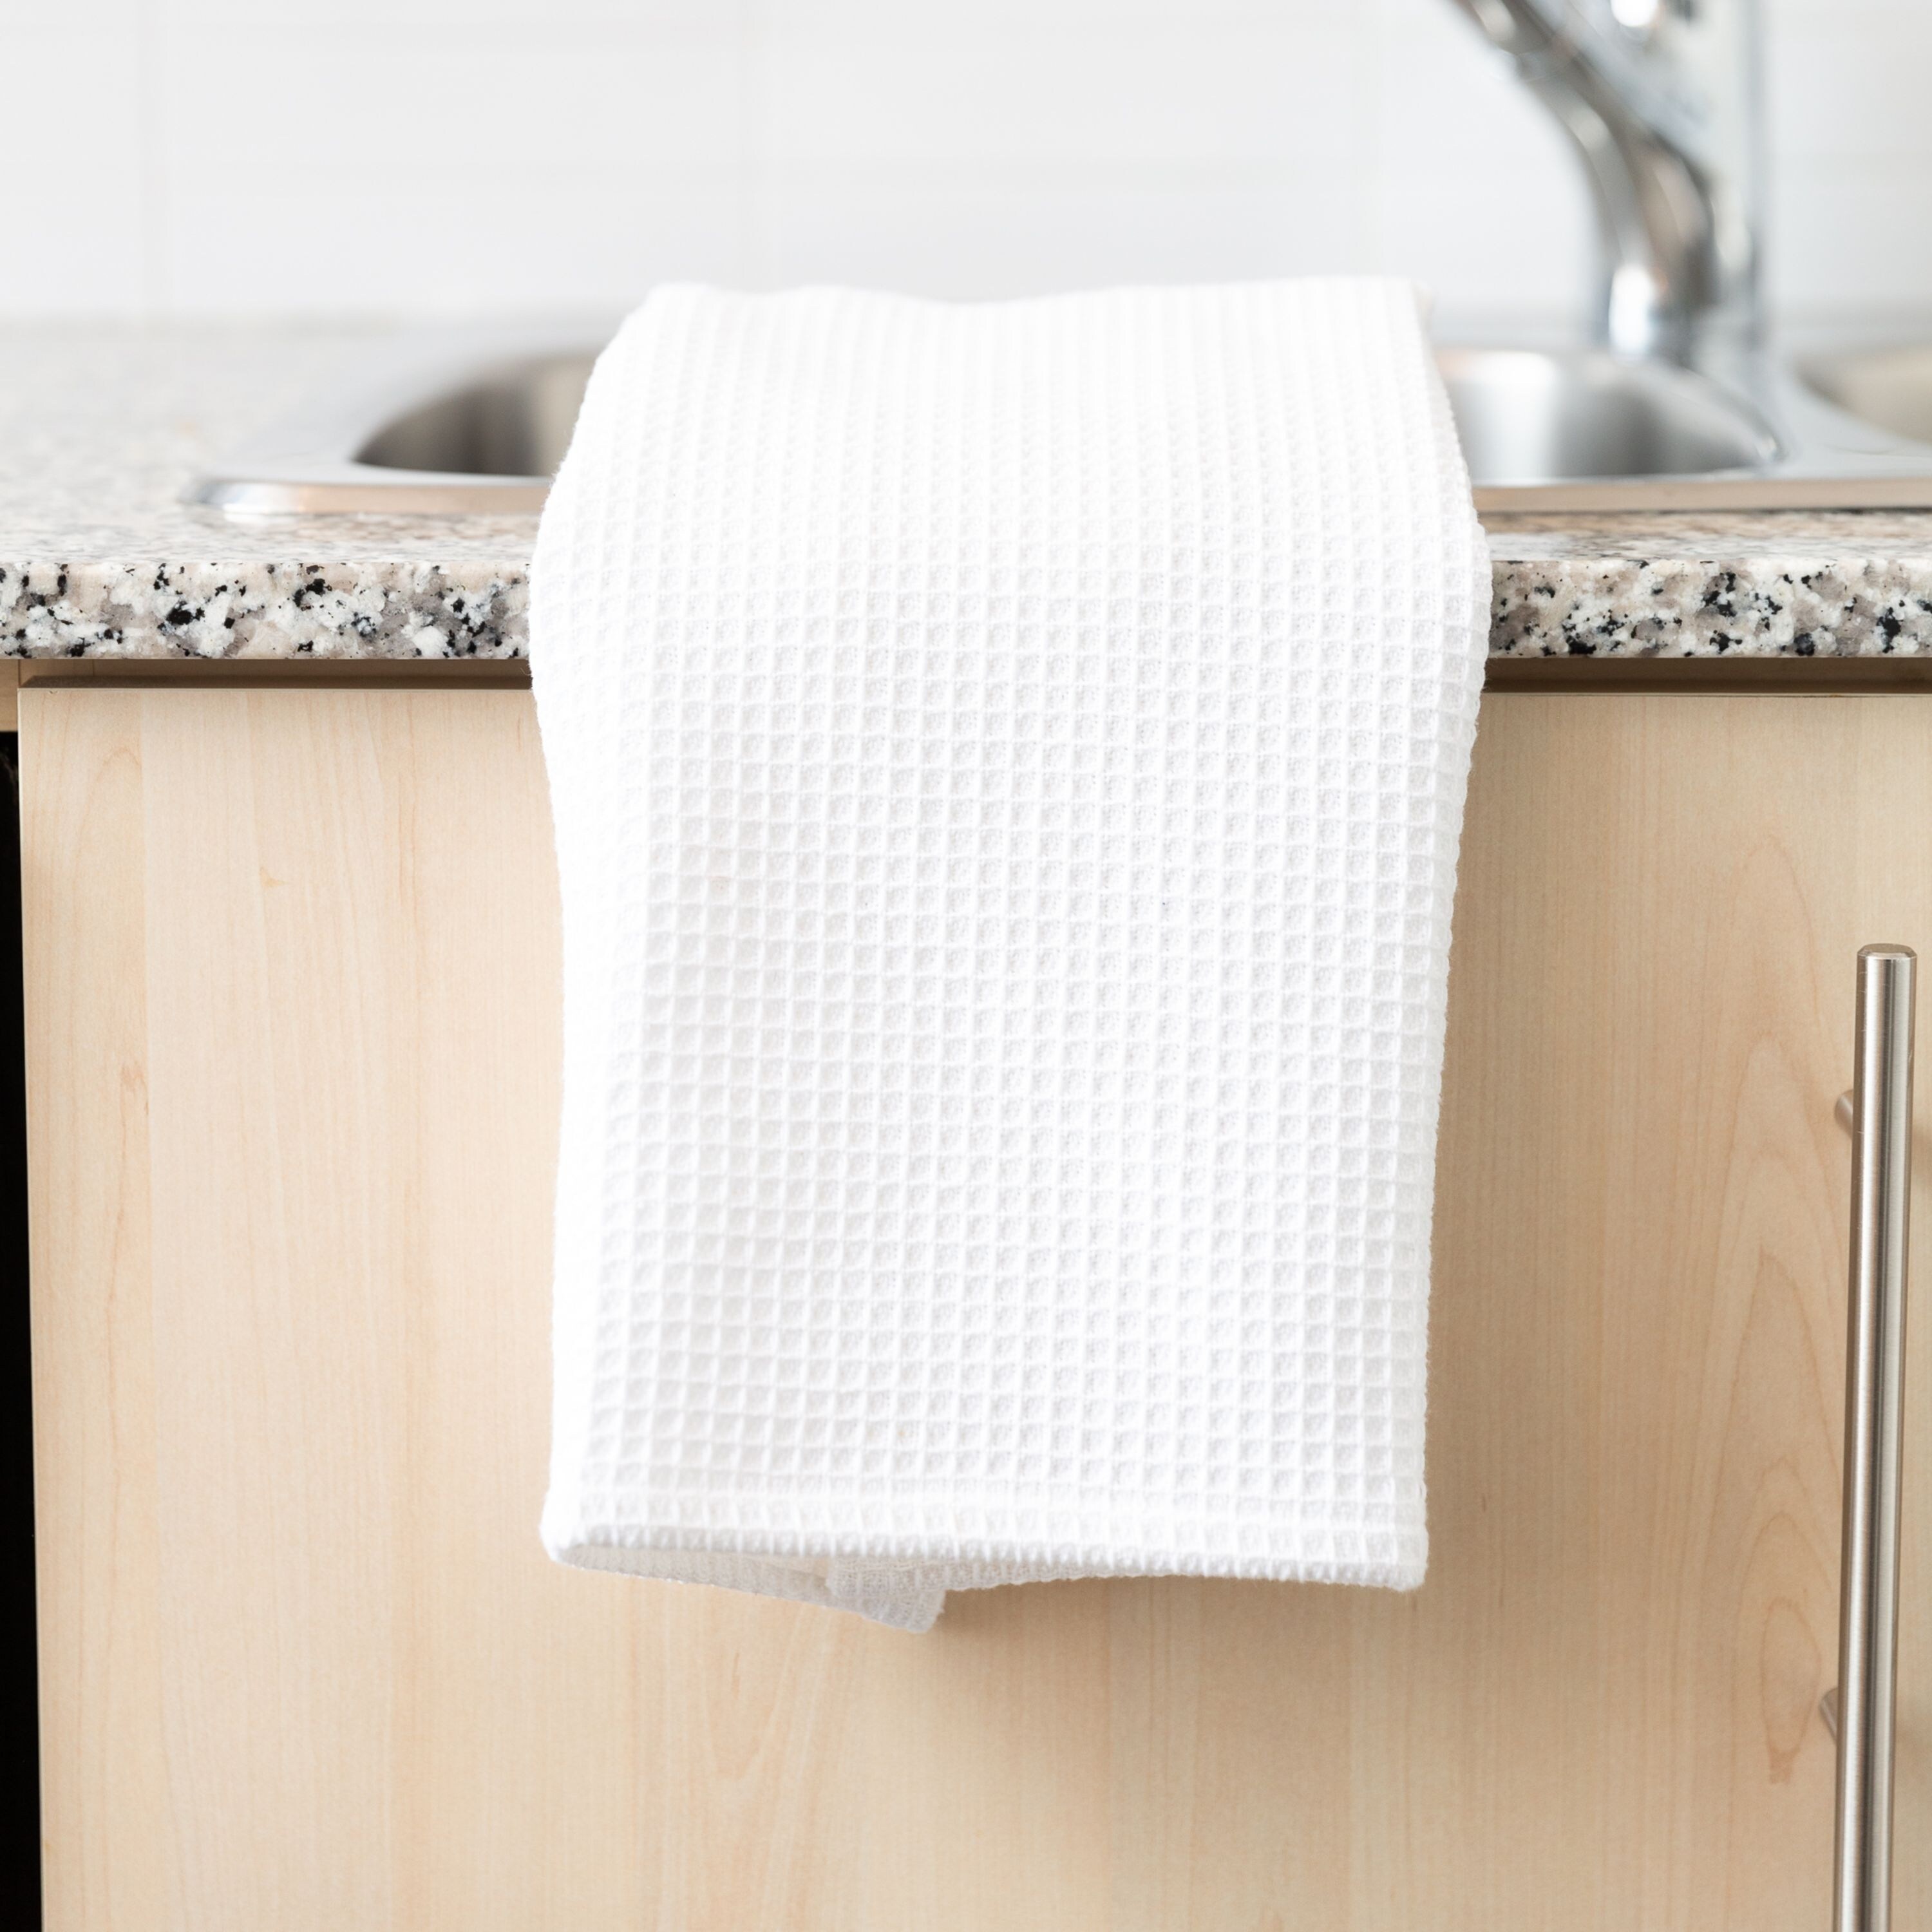 https://ak1.ostkcdn.com/images/products/is/images/direct/ed83090af833ac0ac9da4df6c1d7b4c37e62ba79/Fabstyles-Broadway-Waffle-Cotton-Kitchen-Towels.jpg